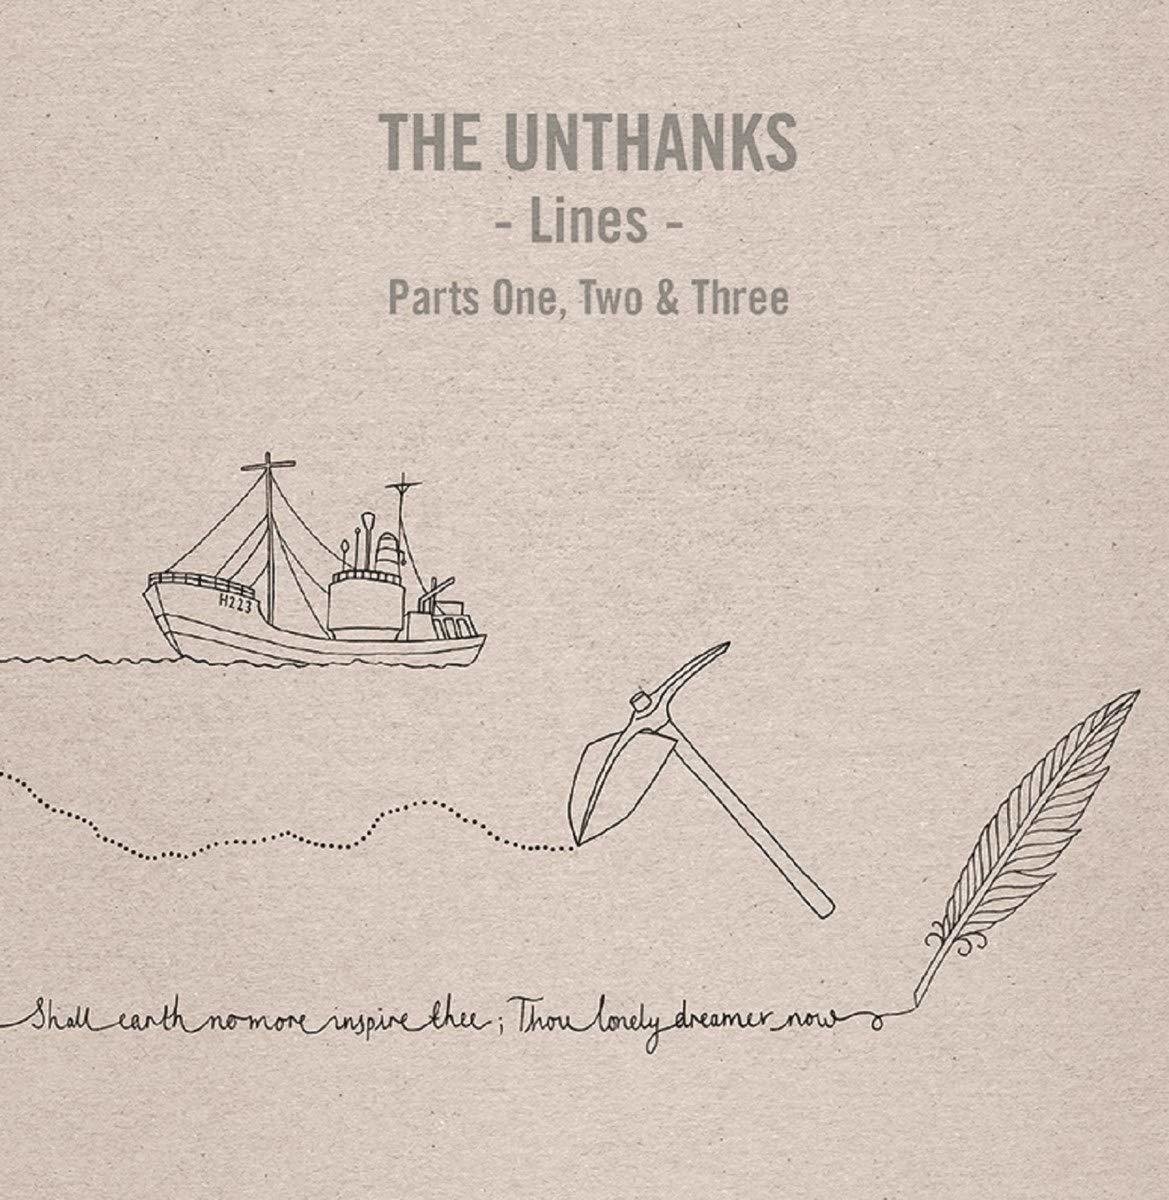 Vinyl Record The Unthanks - Lines - Parts One, Two And Three (3 x 10" Vinyl)